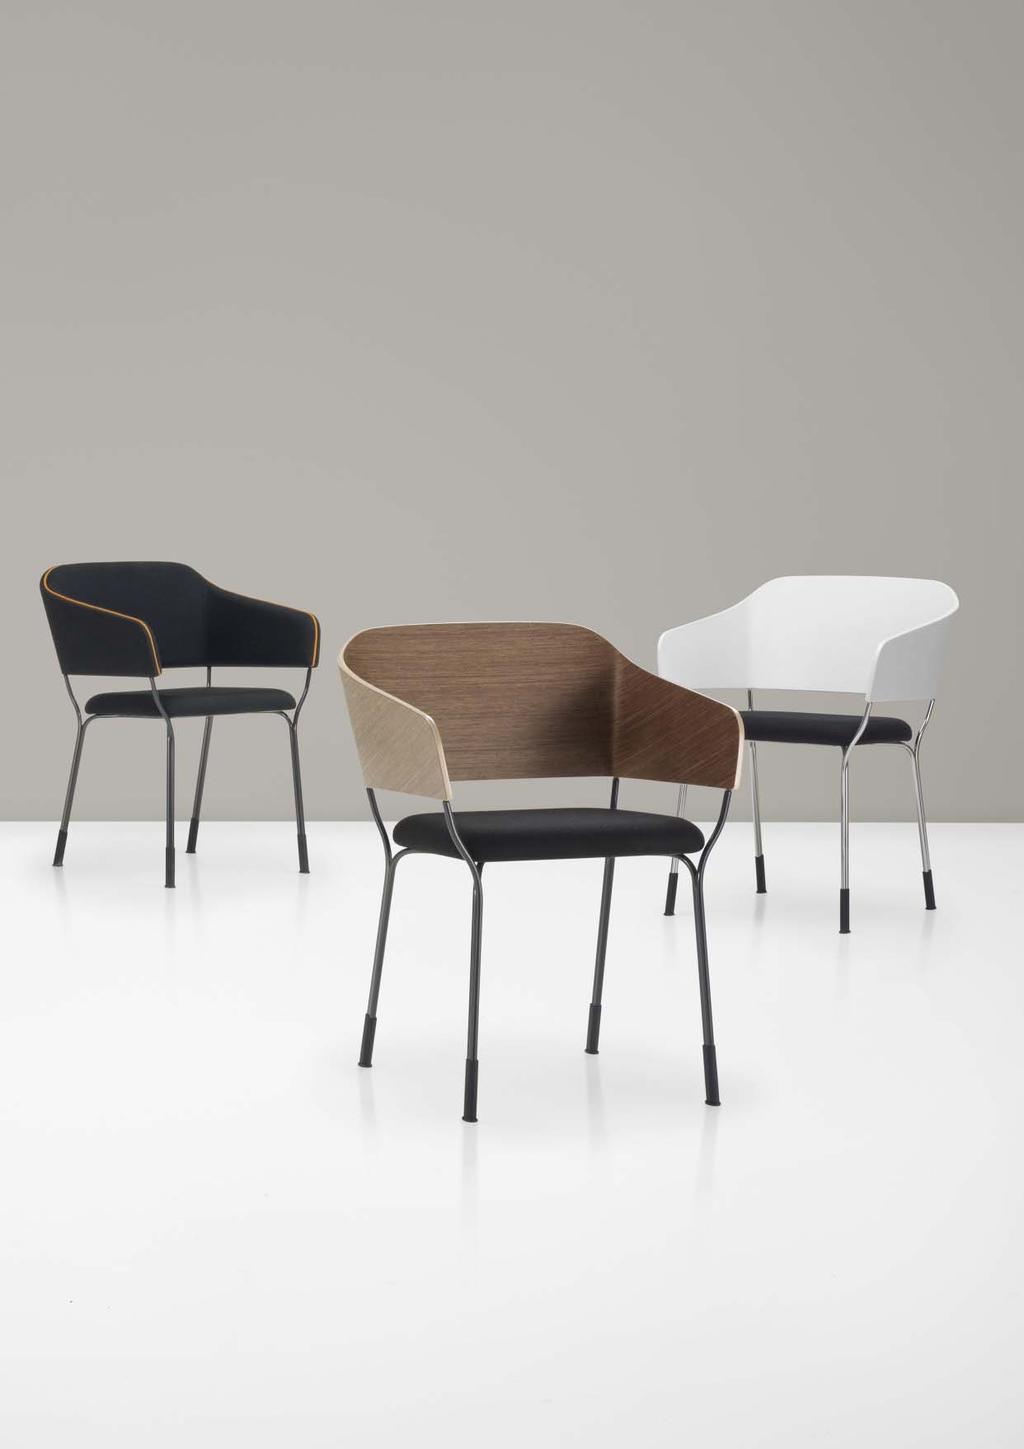 AMINA DESIGN BY INGRID BACKMAN, WHITE ARCHITECTS & TUULA FALK, FALK ARCHITECTS Amina is a chair designed for restaurants, hotels and conferences.